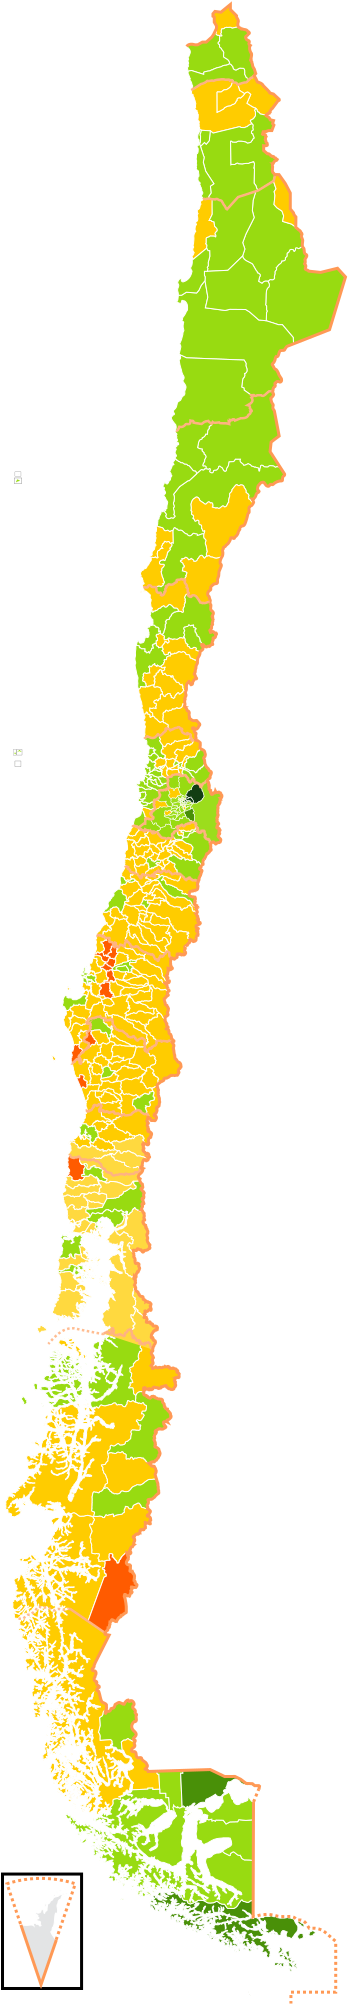 A Map Of Sweden With Different Colored Areas